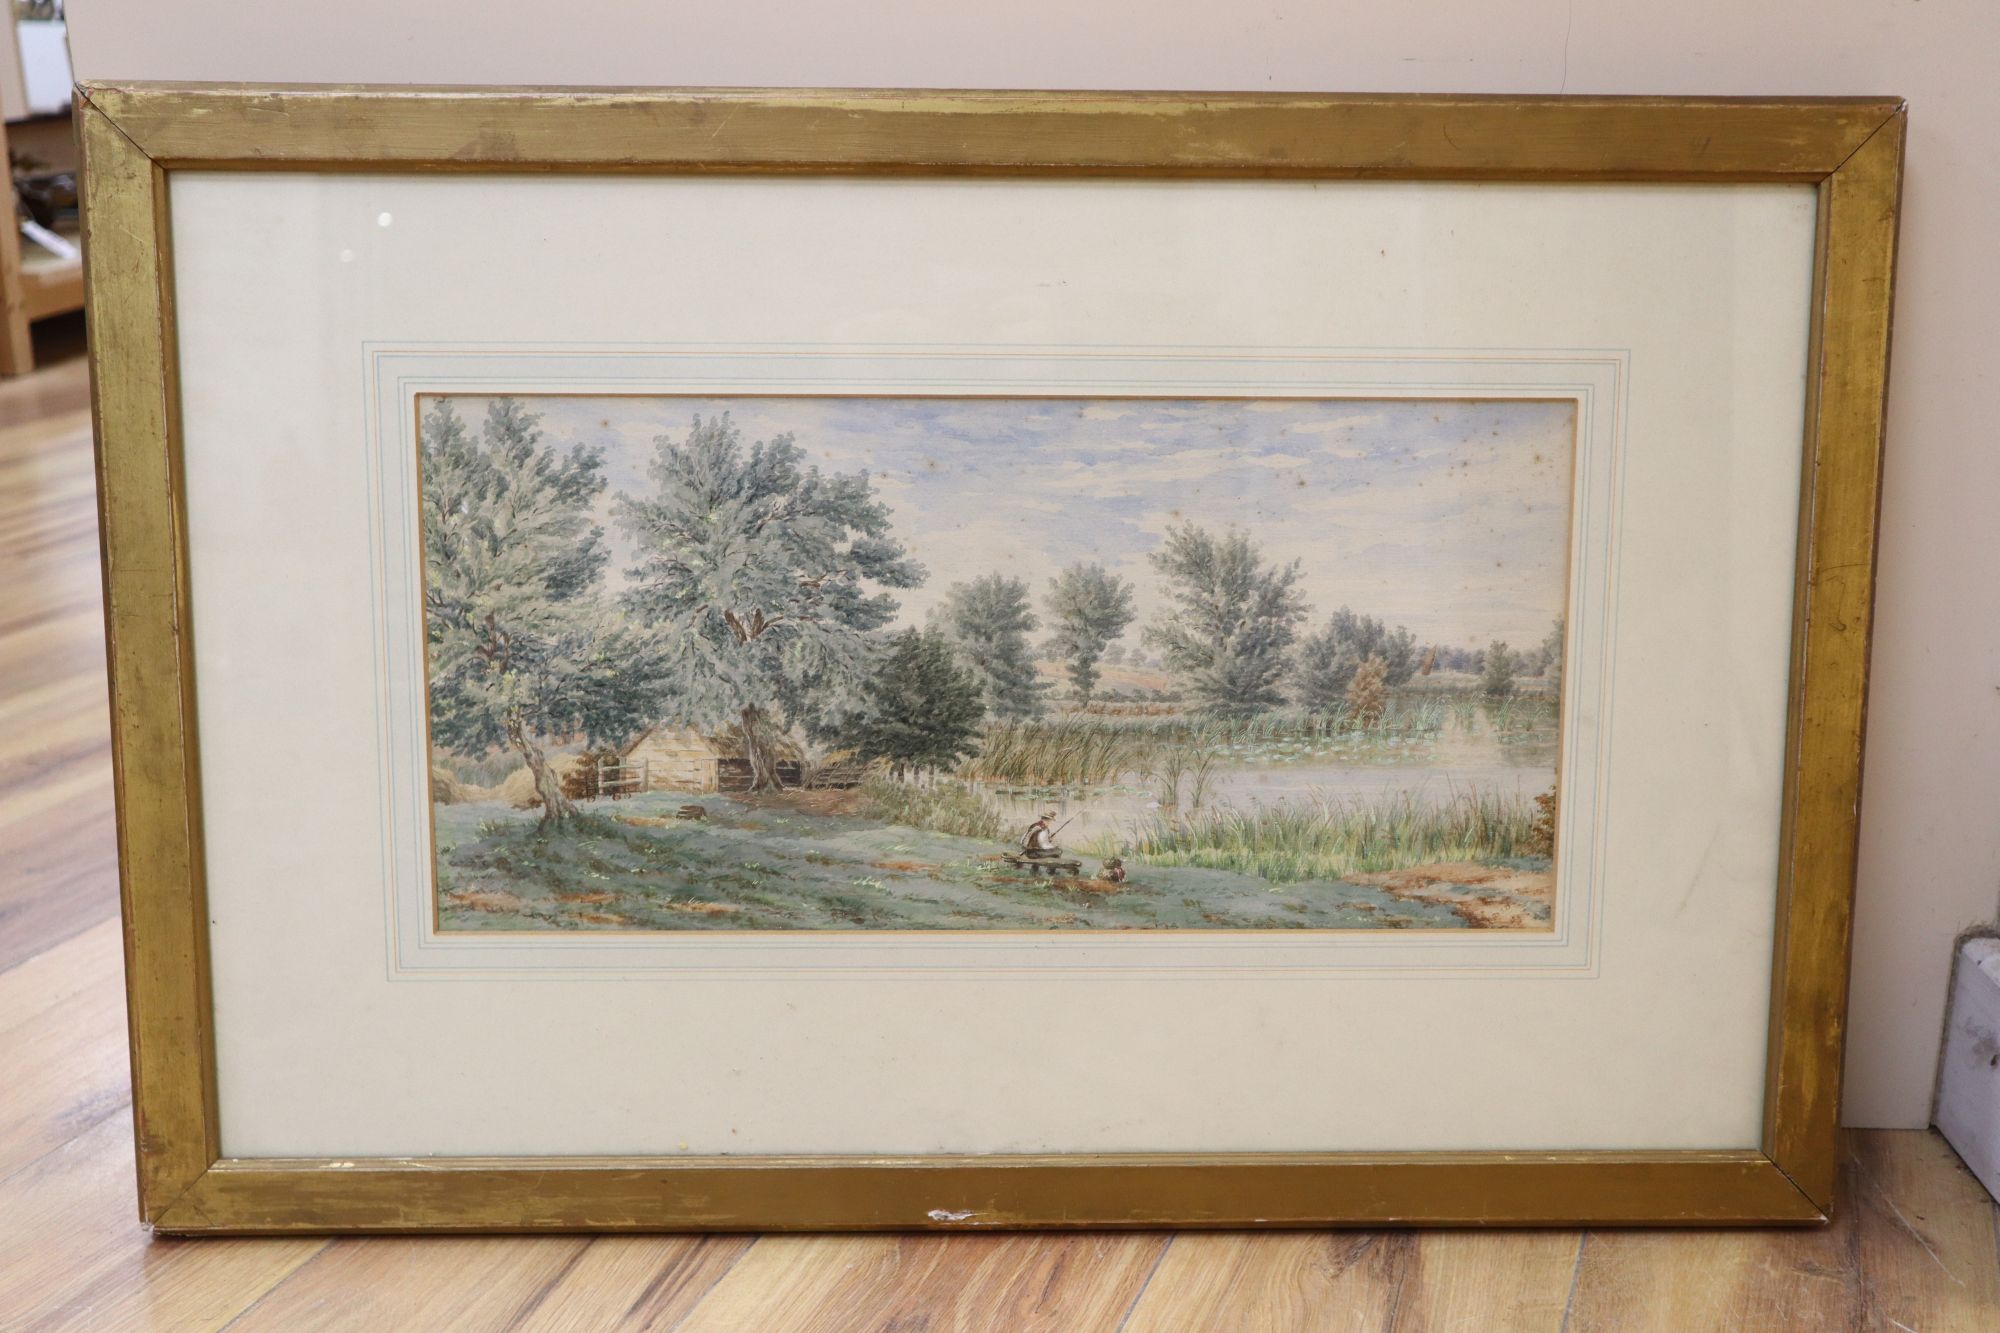 English School c.1900, watercolour, Angler in a landscape, initialled lower right, 22 x 45cm